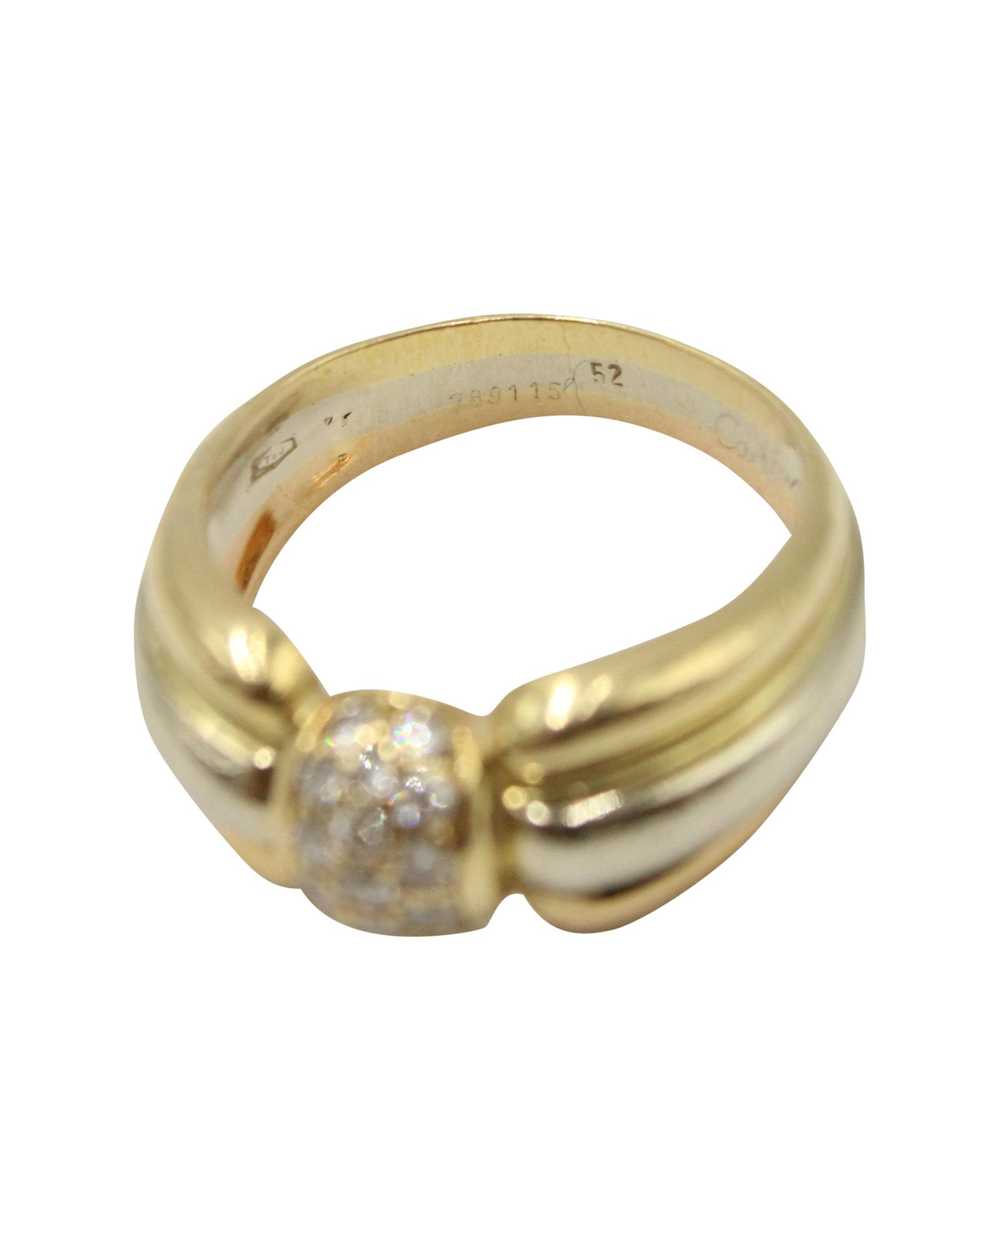 Product Details Cartier 18k Gold Diamond Ring - image 5